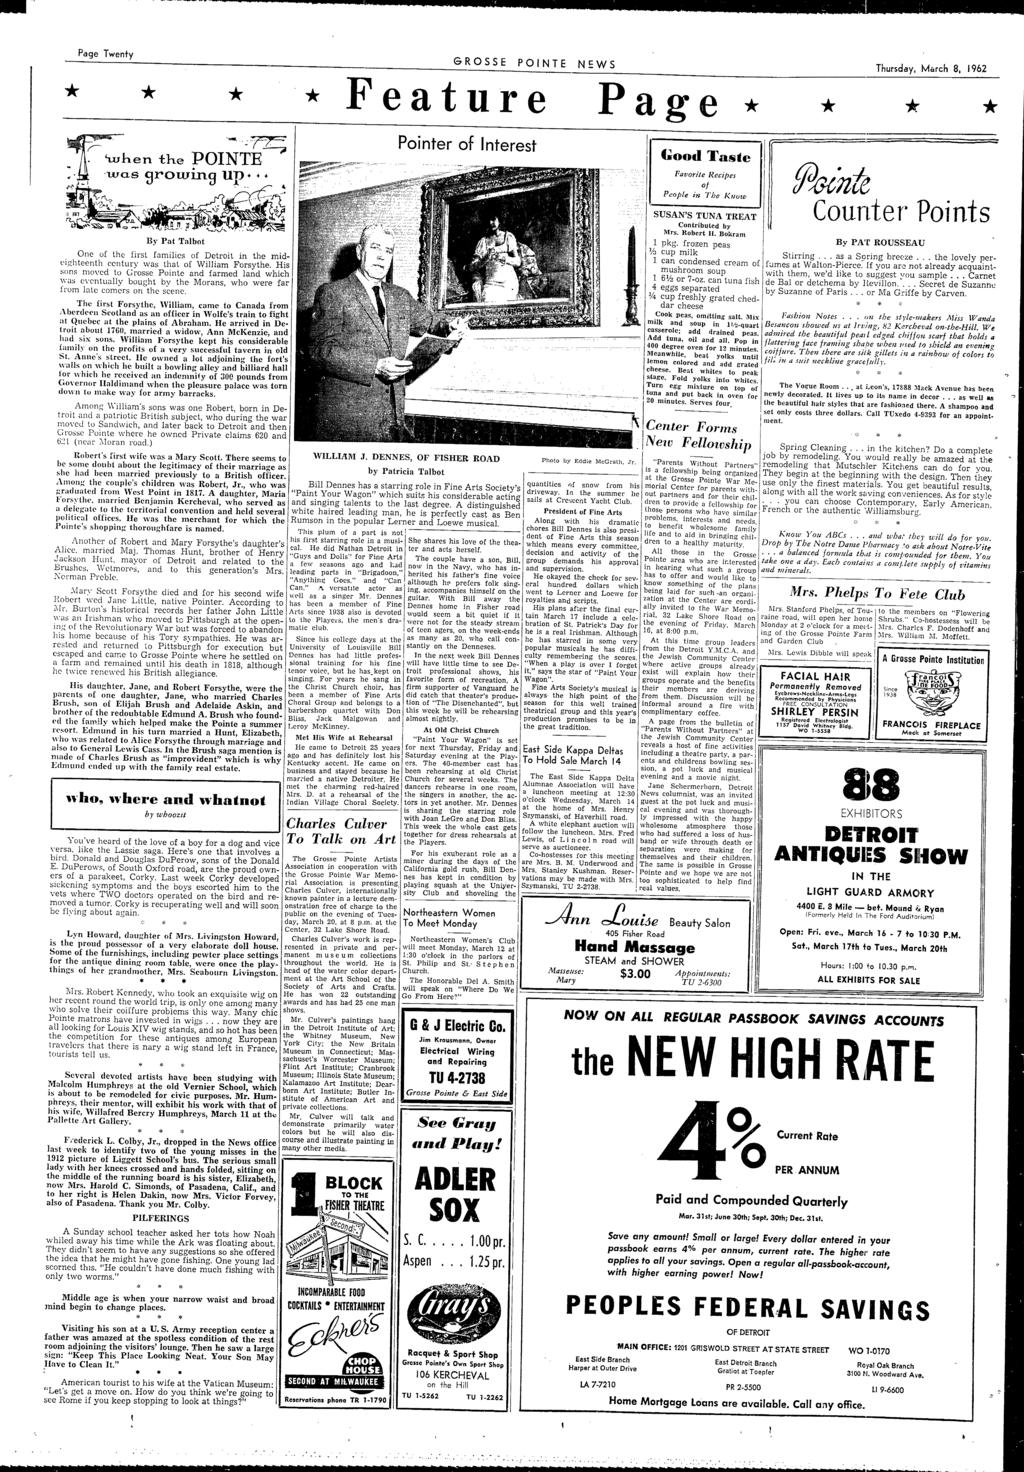 - 'ft Page Twenty GROSSE PONTE NEWS Thursday, March 8, 1962 * * * * Feature Page * * * * By Pat Talbot One of the first families of Detroit in the midcig'hteenth century was that of William Forsythe